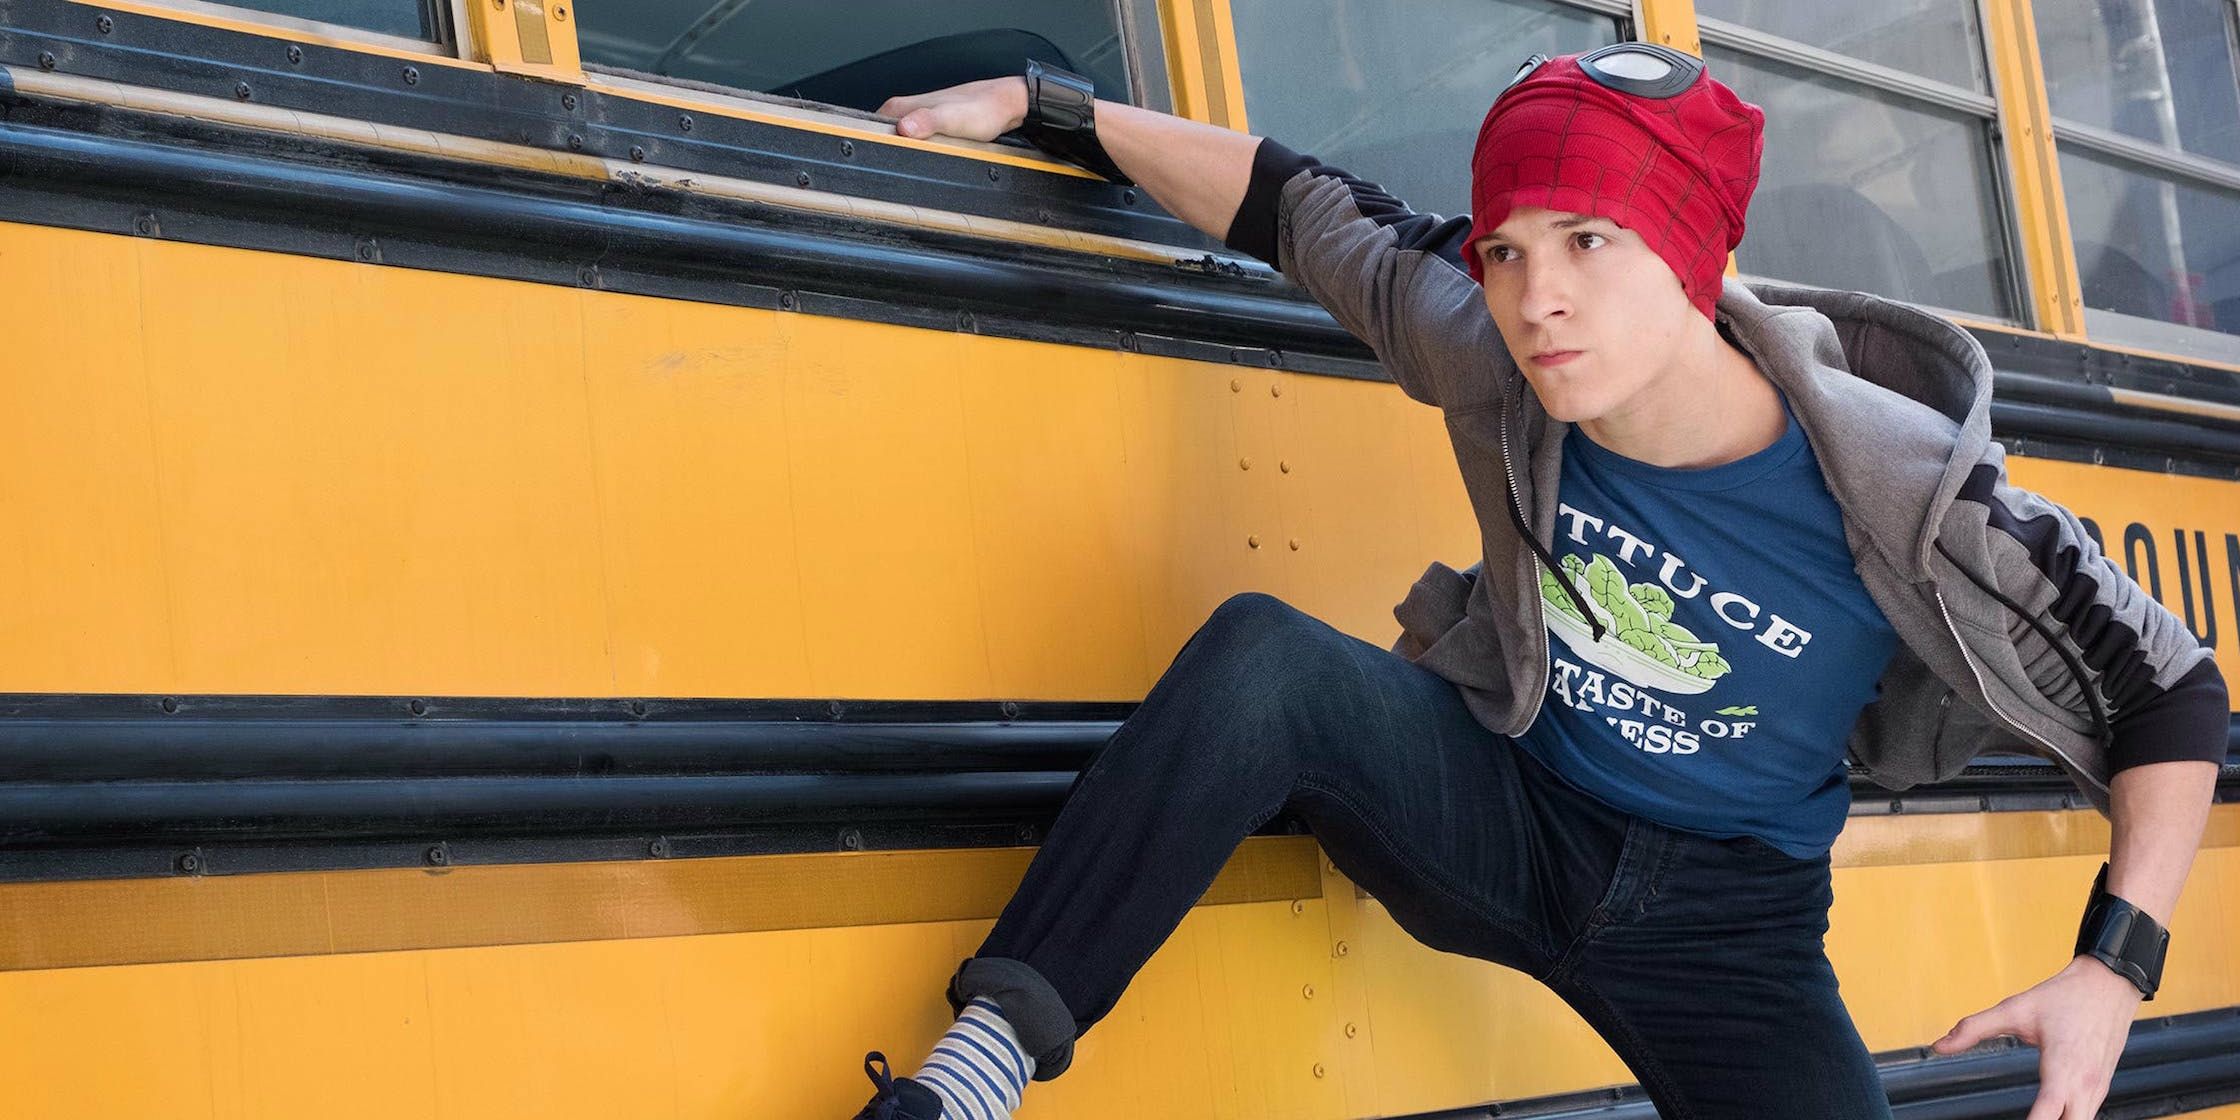 Peter Parker hangs off the edge of a bus in Marvels Spider-Man: Homecoming